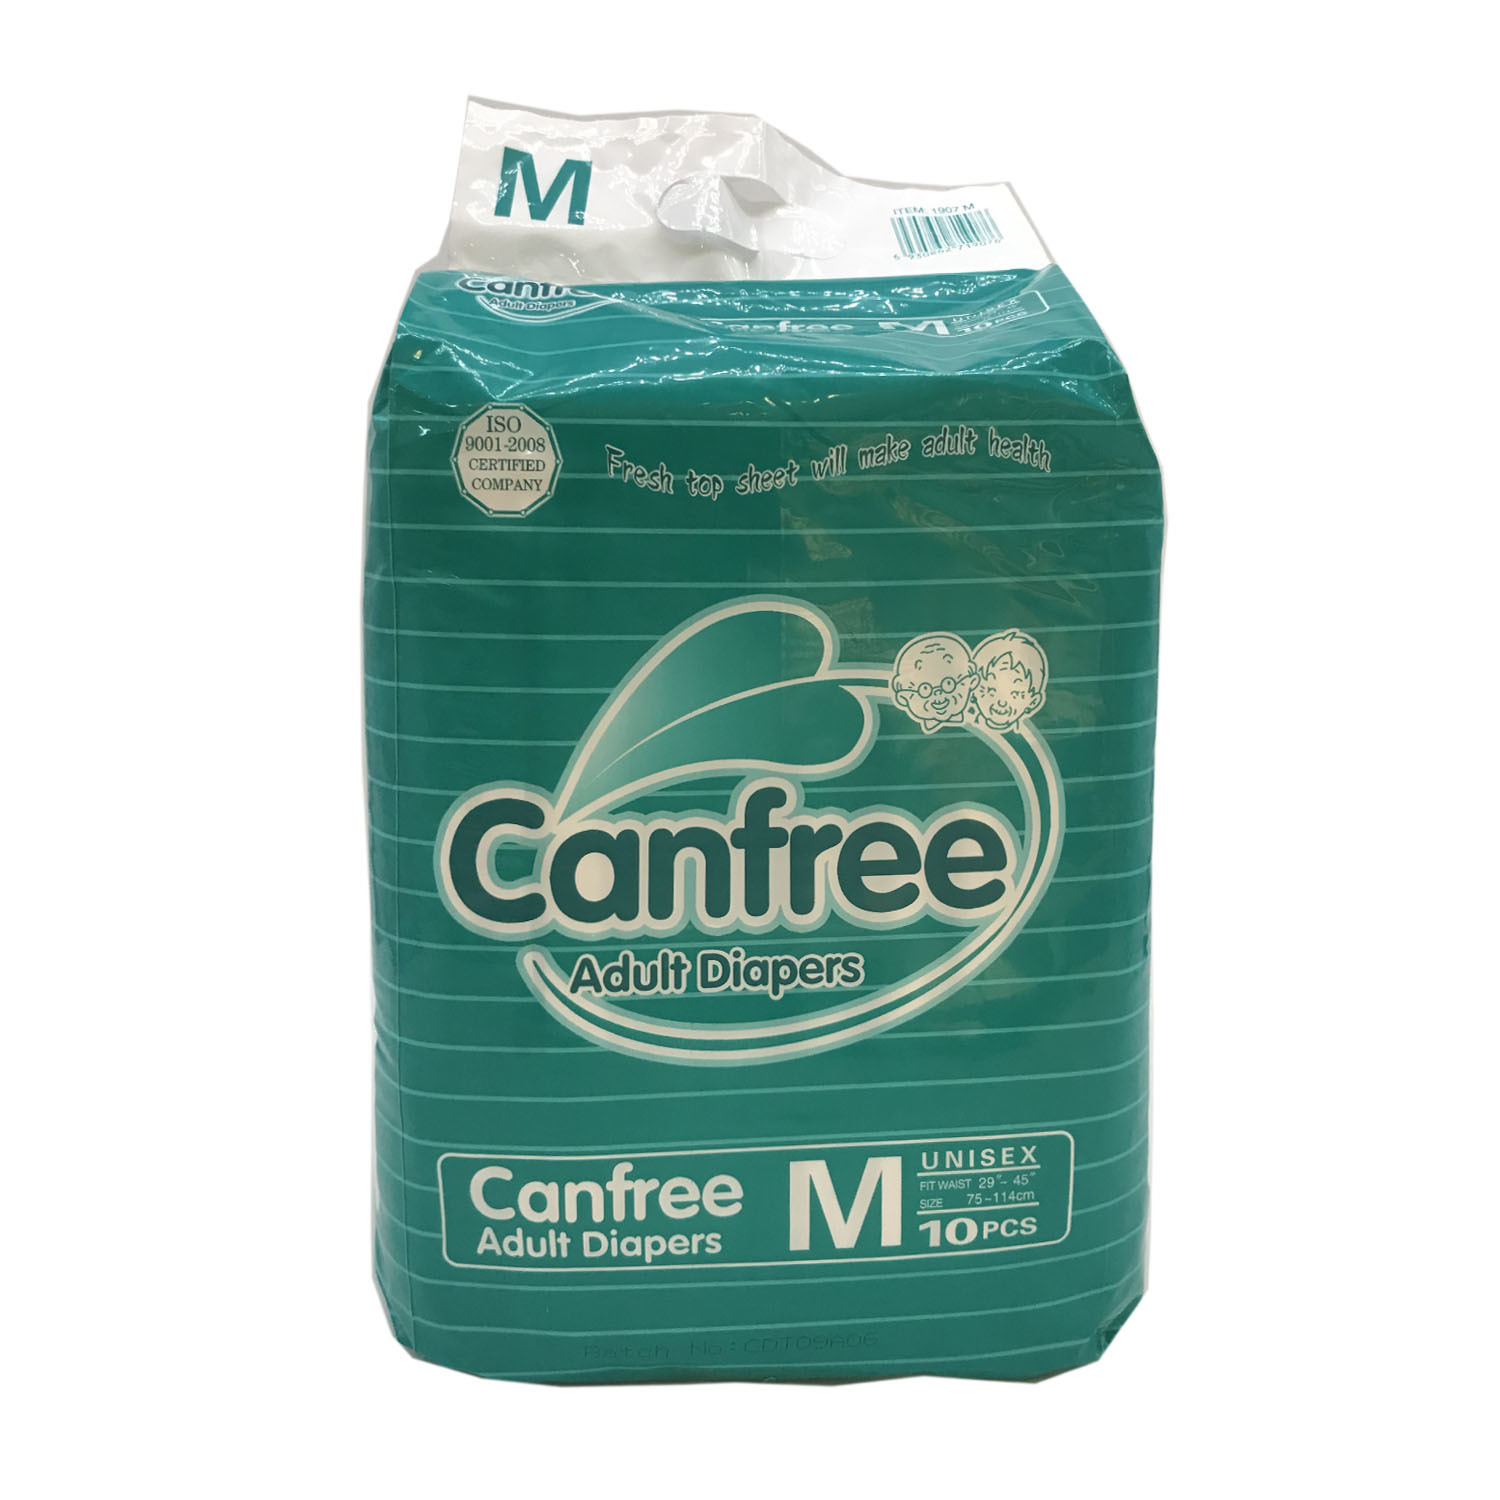 Canfree Brand Adult Diaper